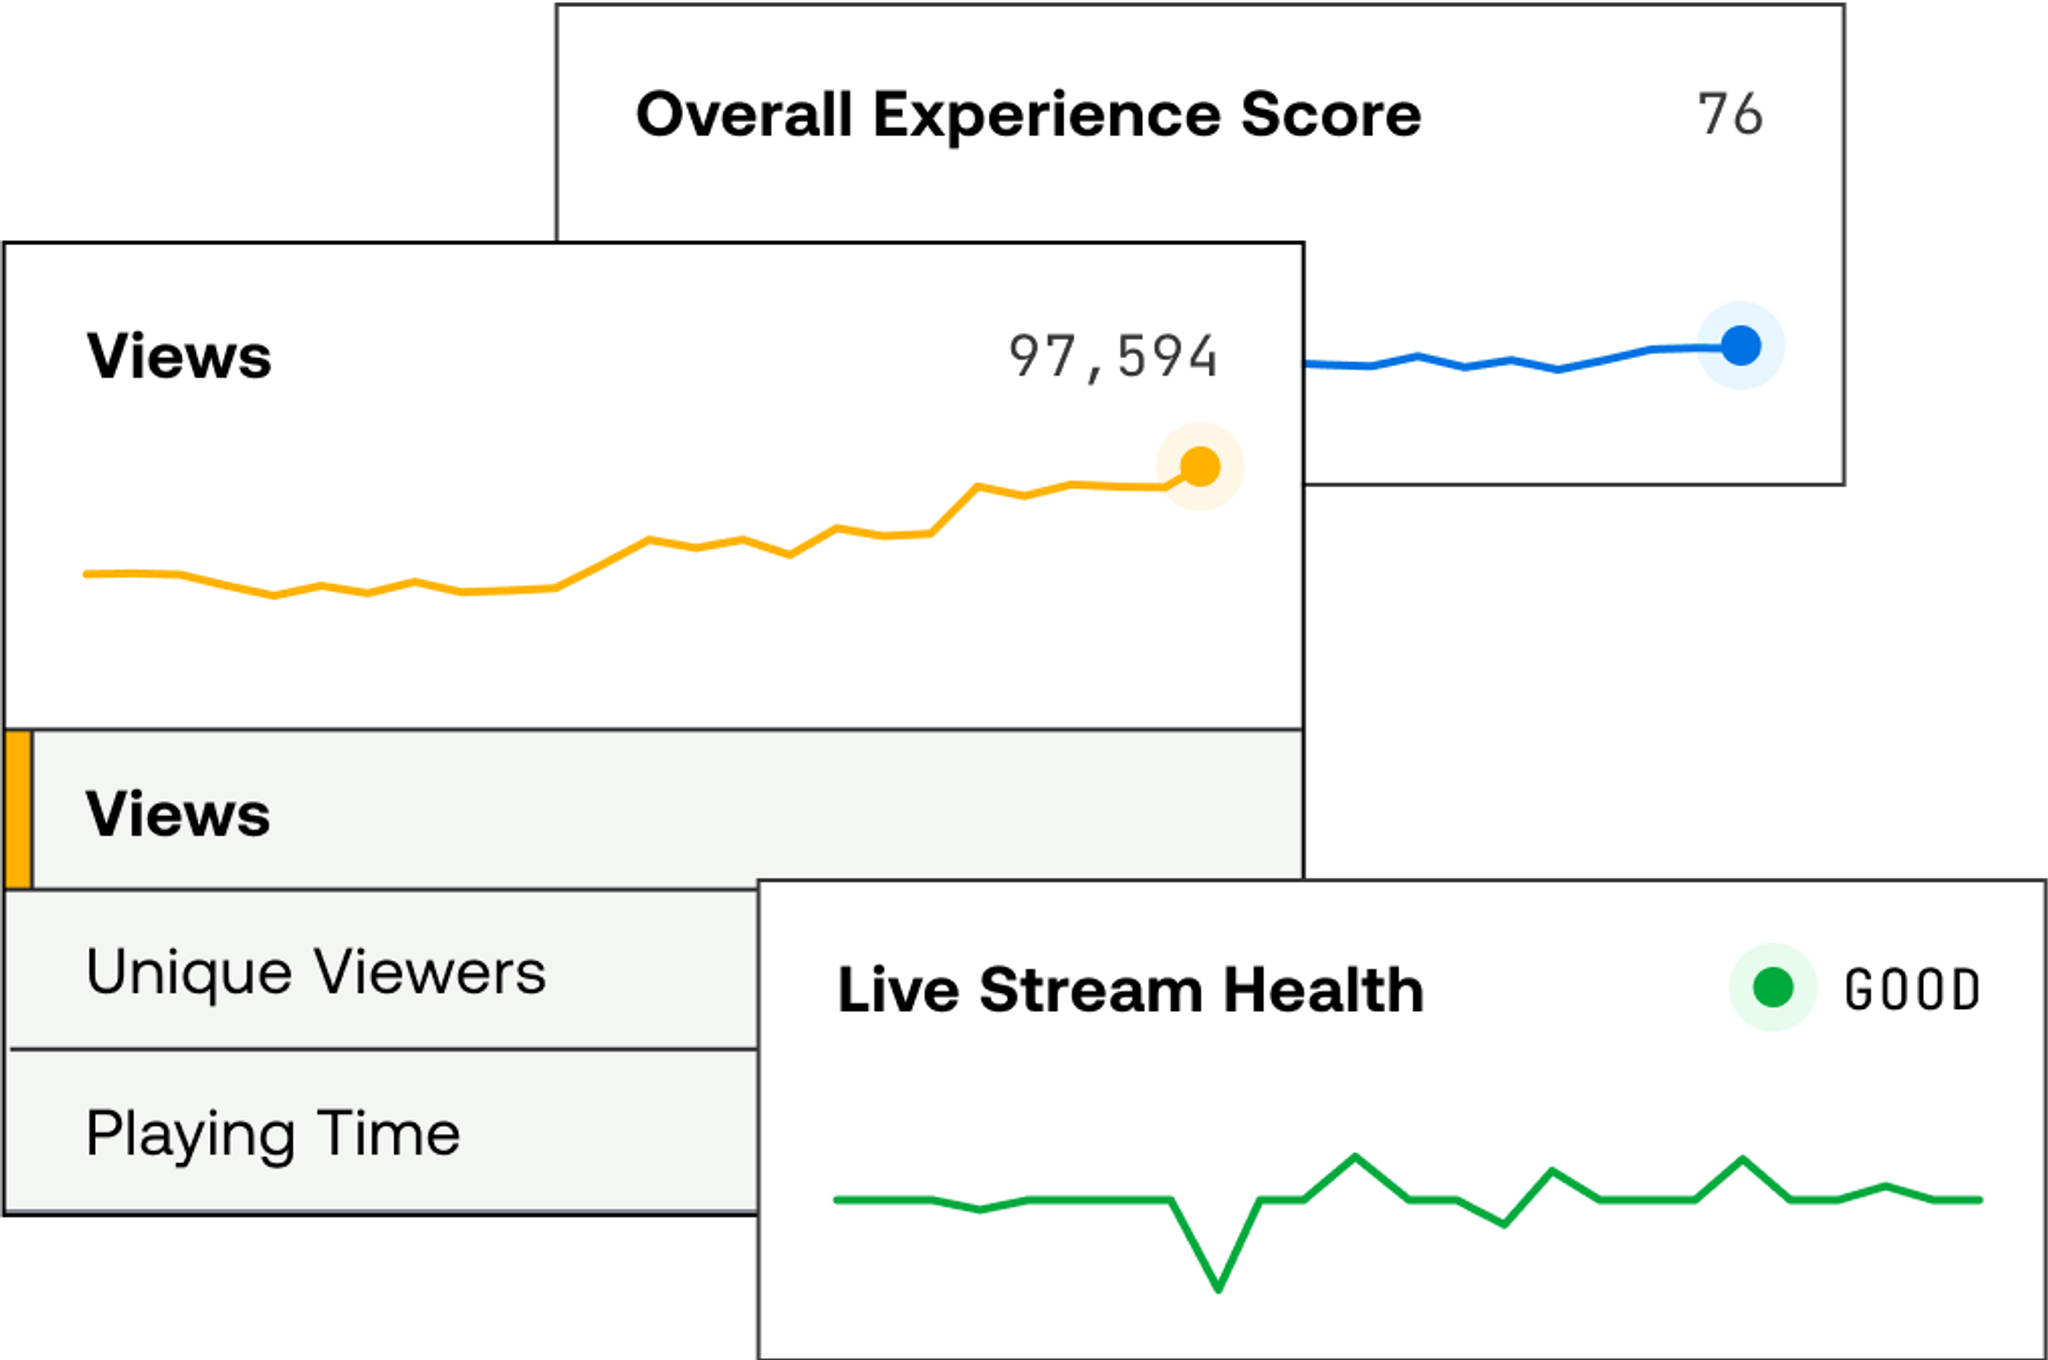 Data from Mux: views, live stream health, overall experience score